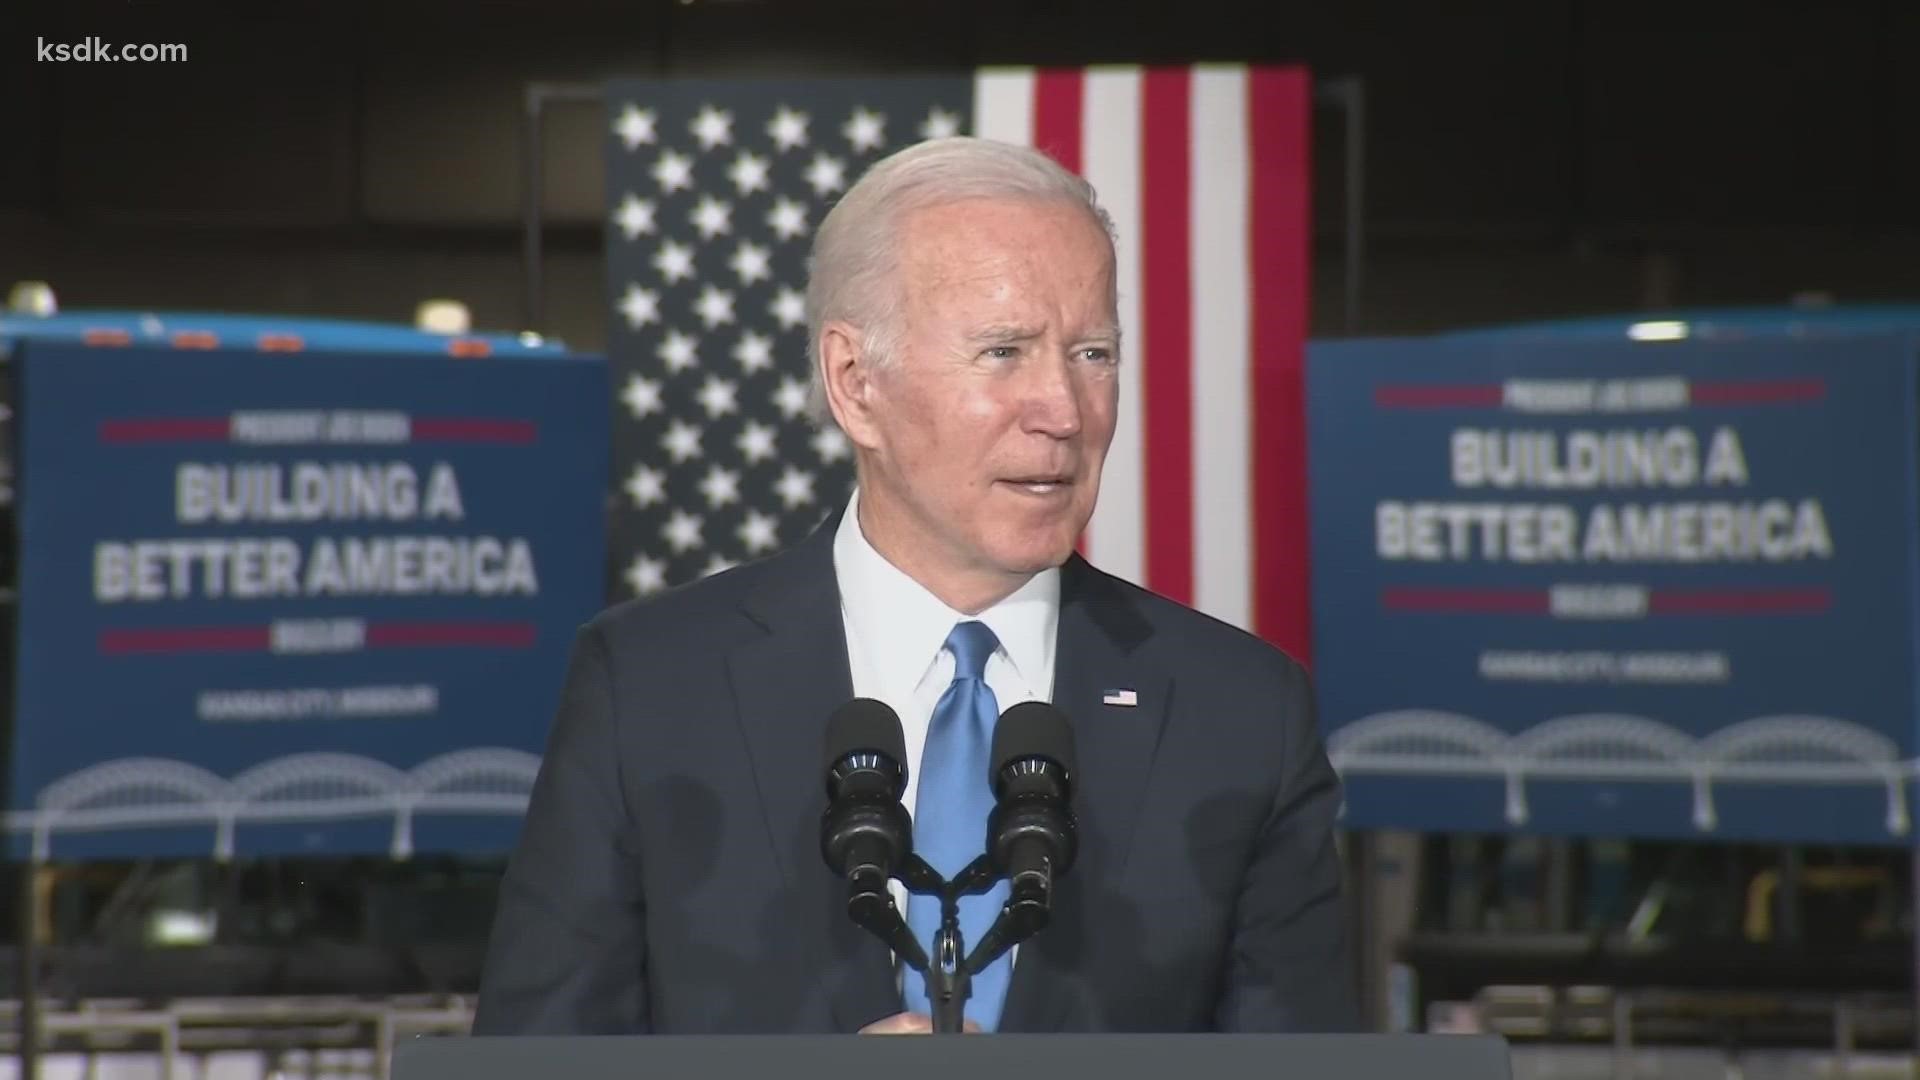 Pres. Joe Biden is in Kansas City to talk about how the $1 trillion law will help Missouri build roads, bridges and other infrastructure.